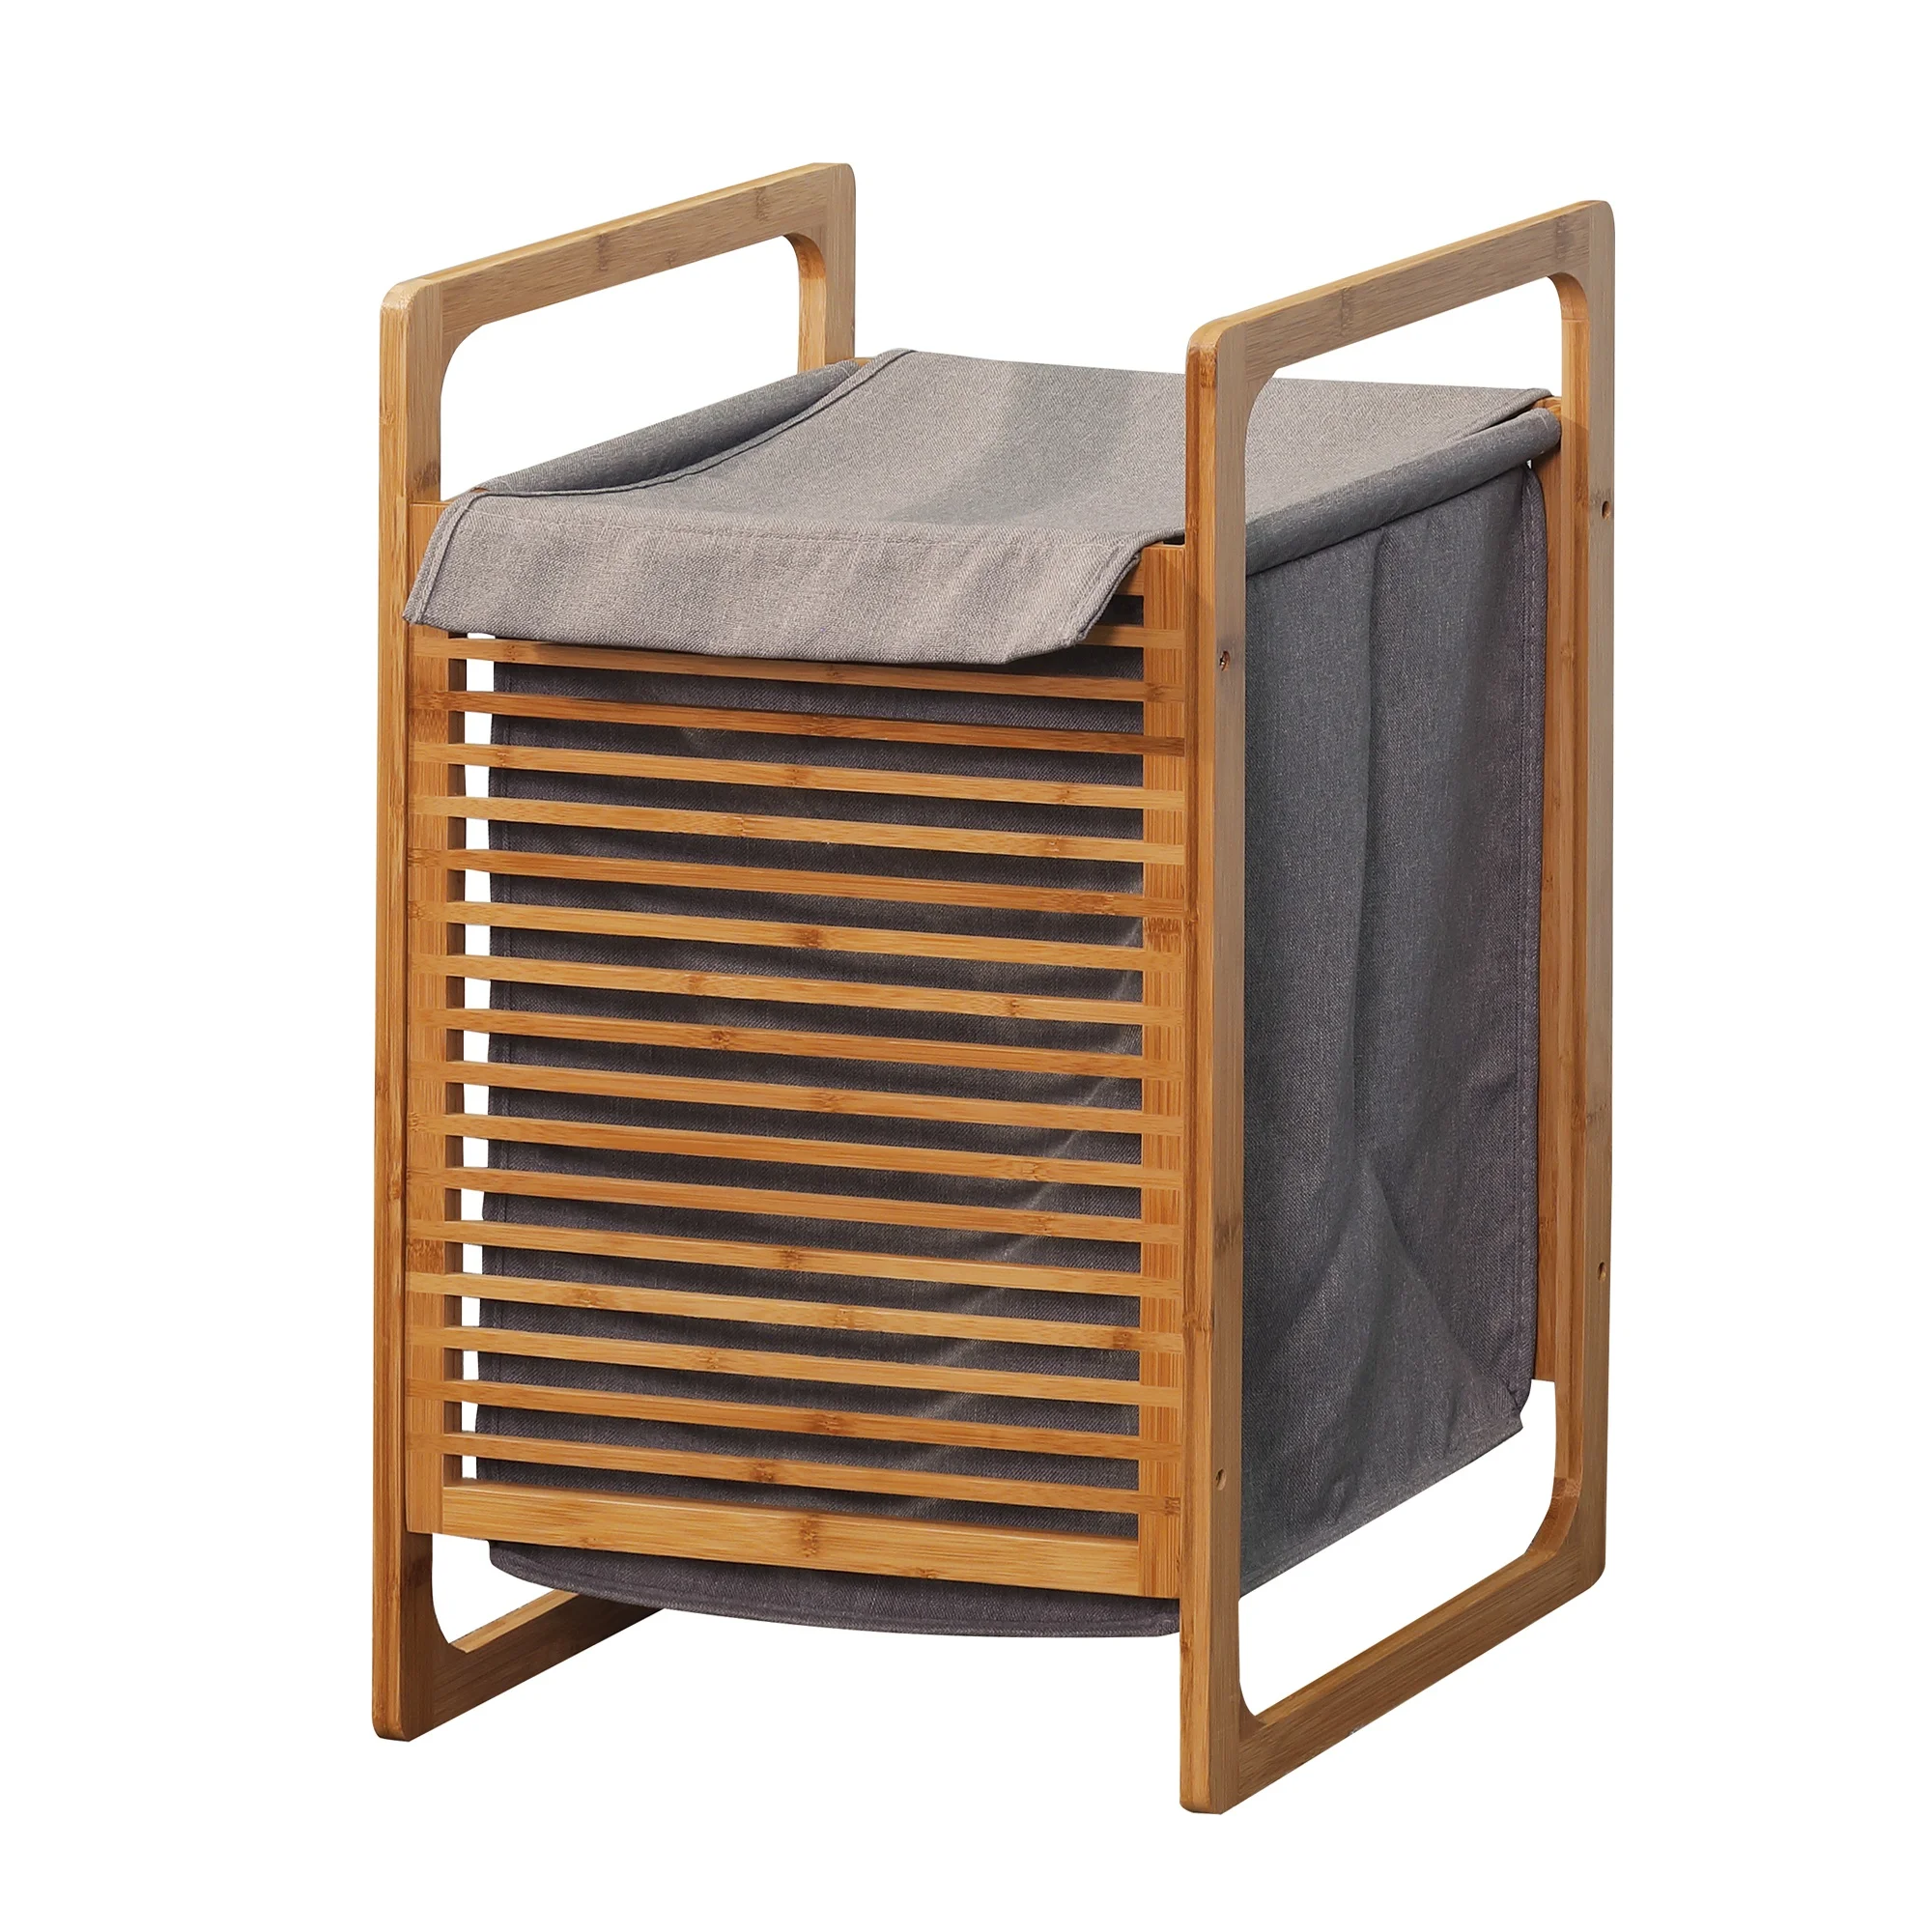 

Furniture Bathroom Laundry Basket Bamboo Storage Basket with 2 Bamboo Handles 15.74 x 13.78 x 23.82 inch